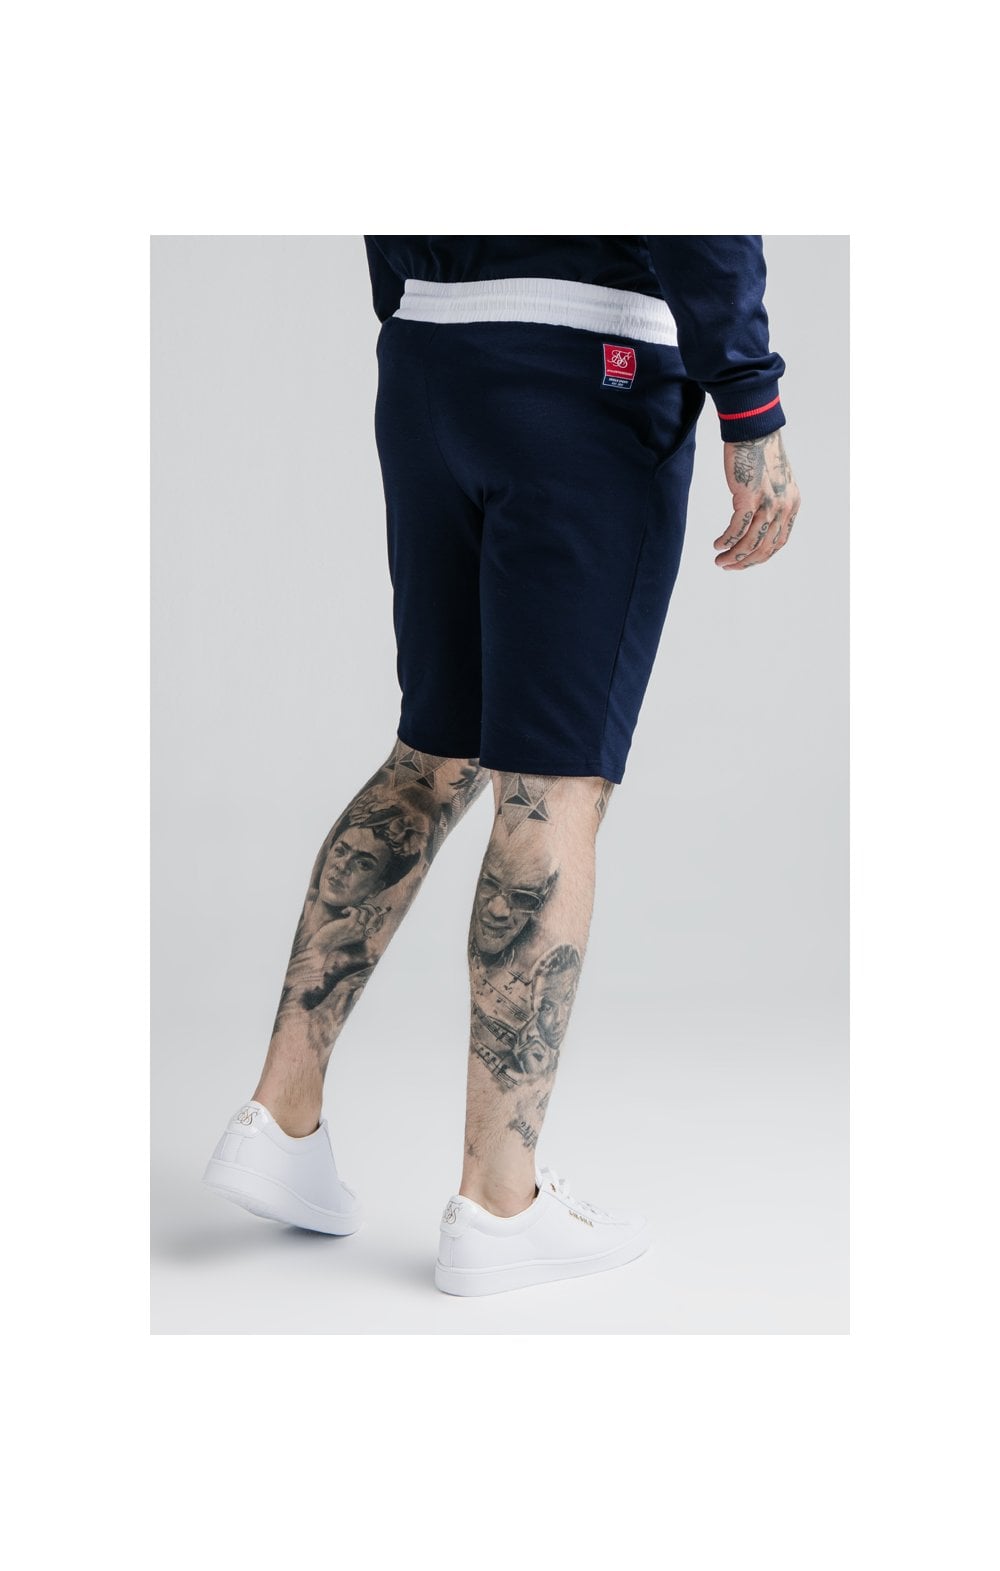 Load image into Gallery viewer, SikSilk Retro Sport Shorts - Navy (3)